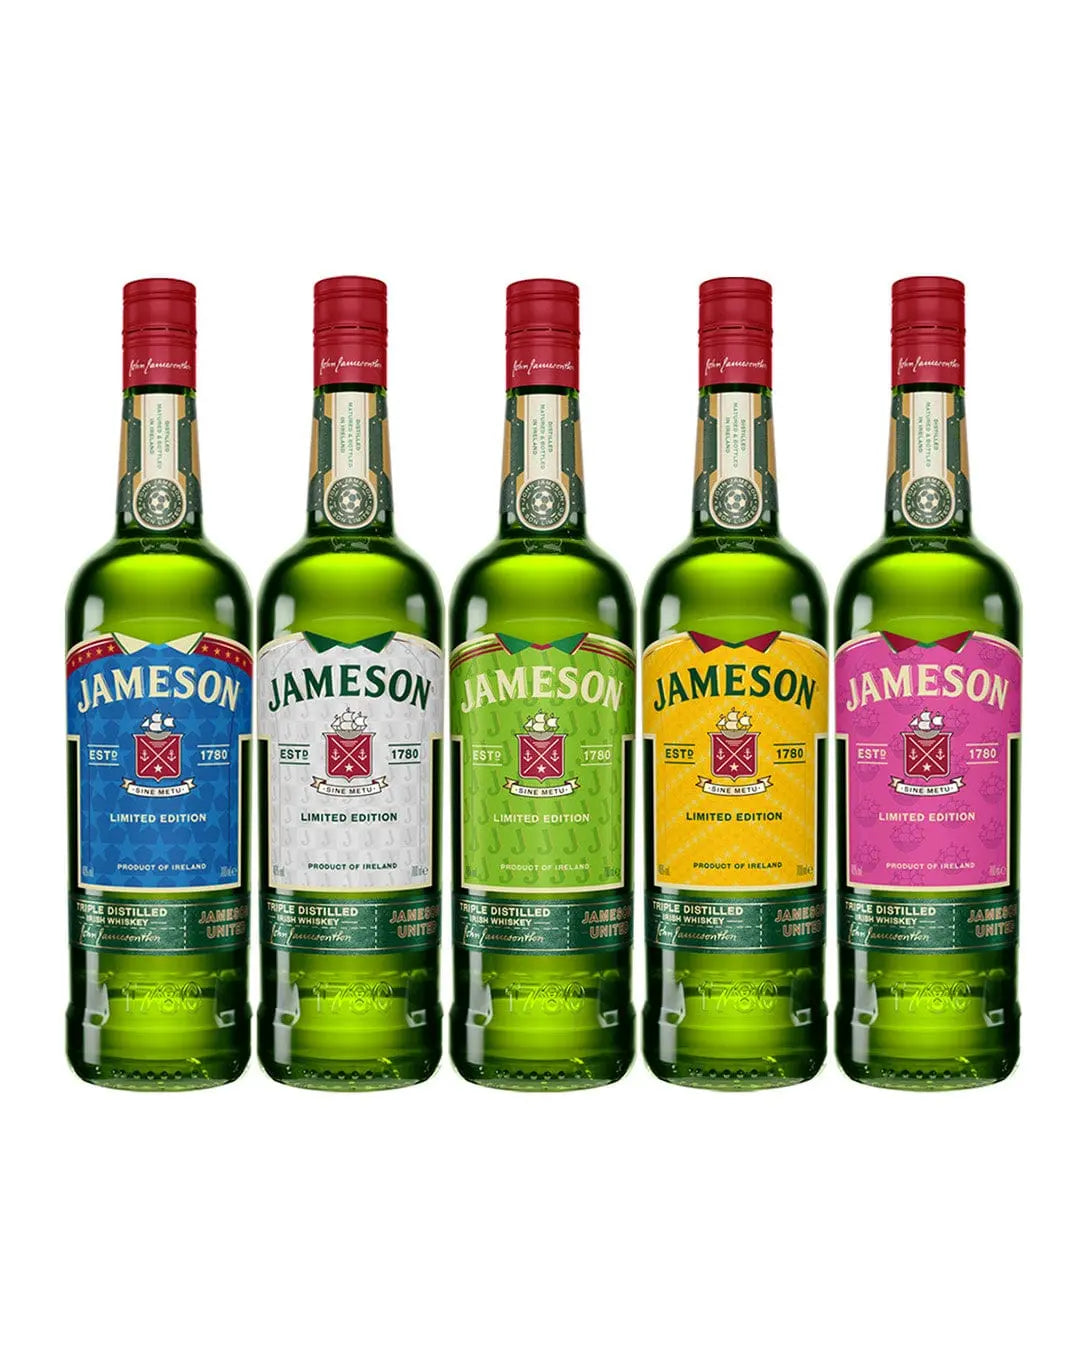 Jameson United Limited Edition Whisky, 70 cl Whisky